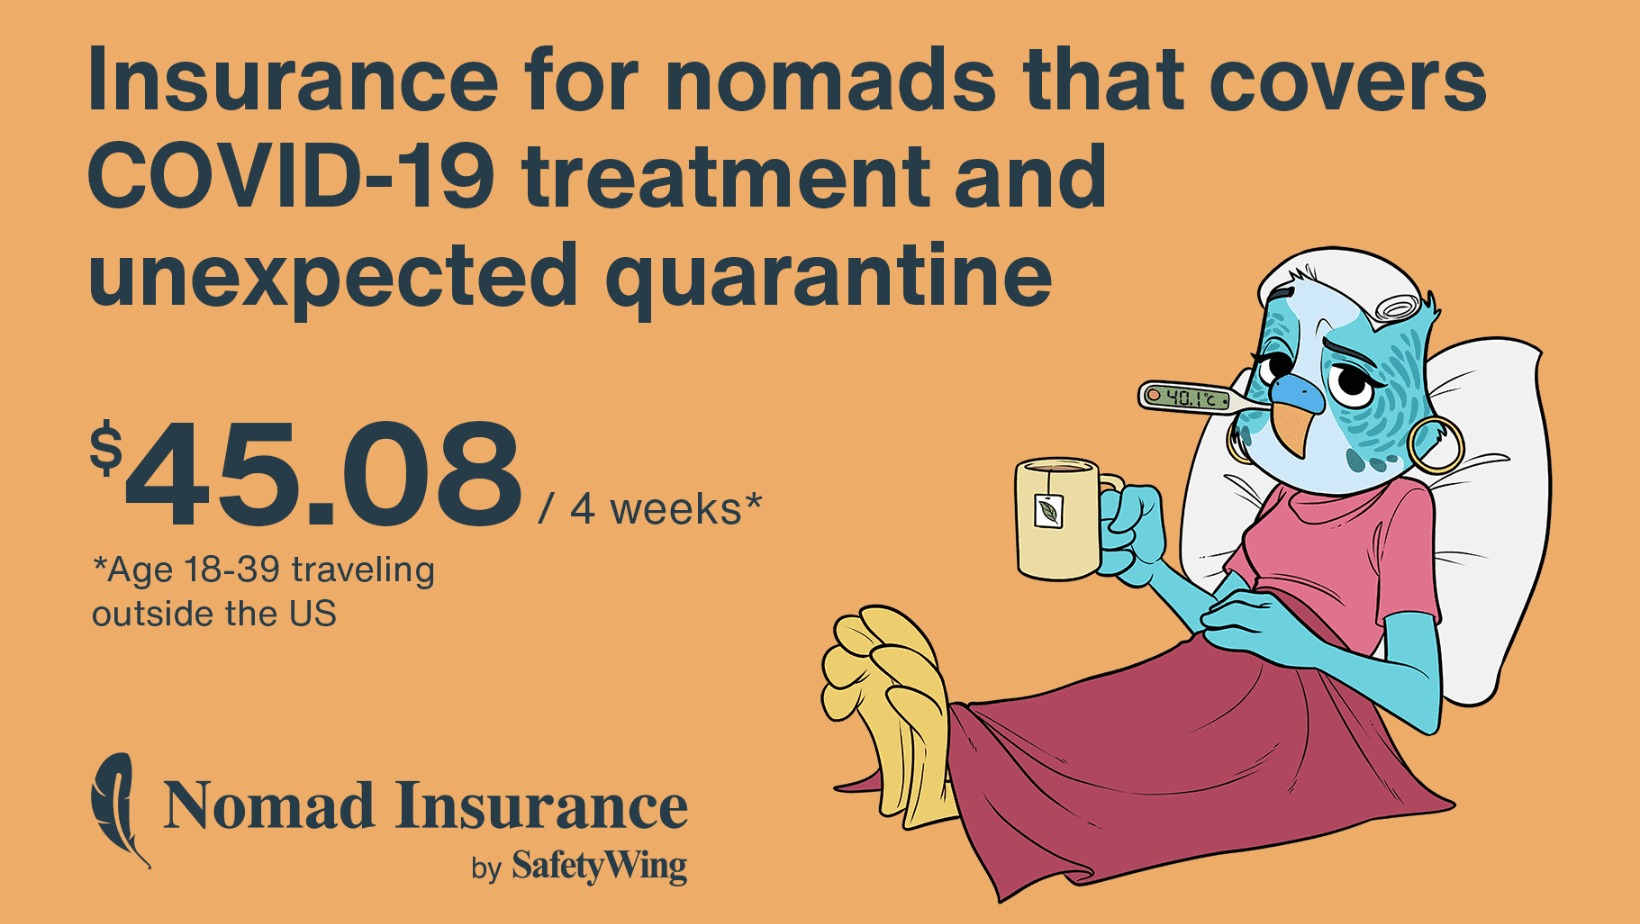 SafetyWing Nomad Insurance